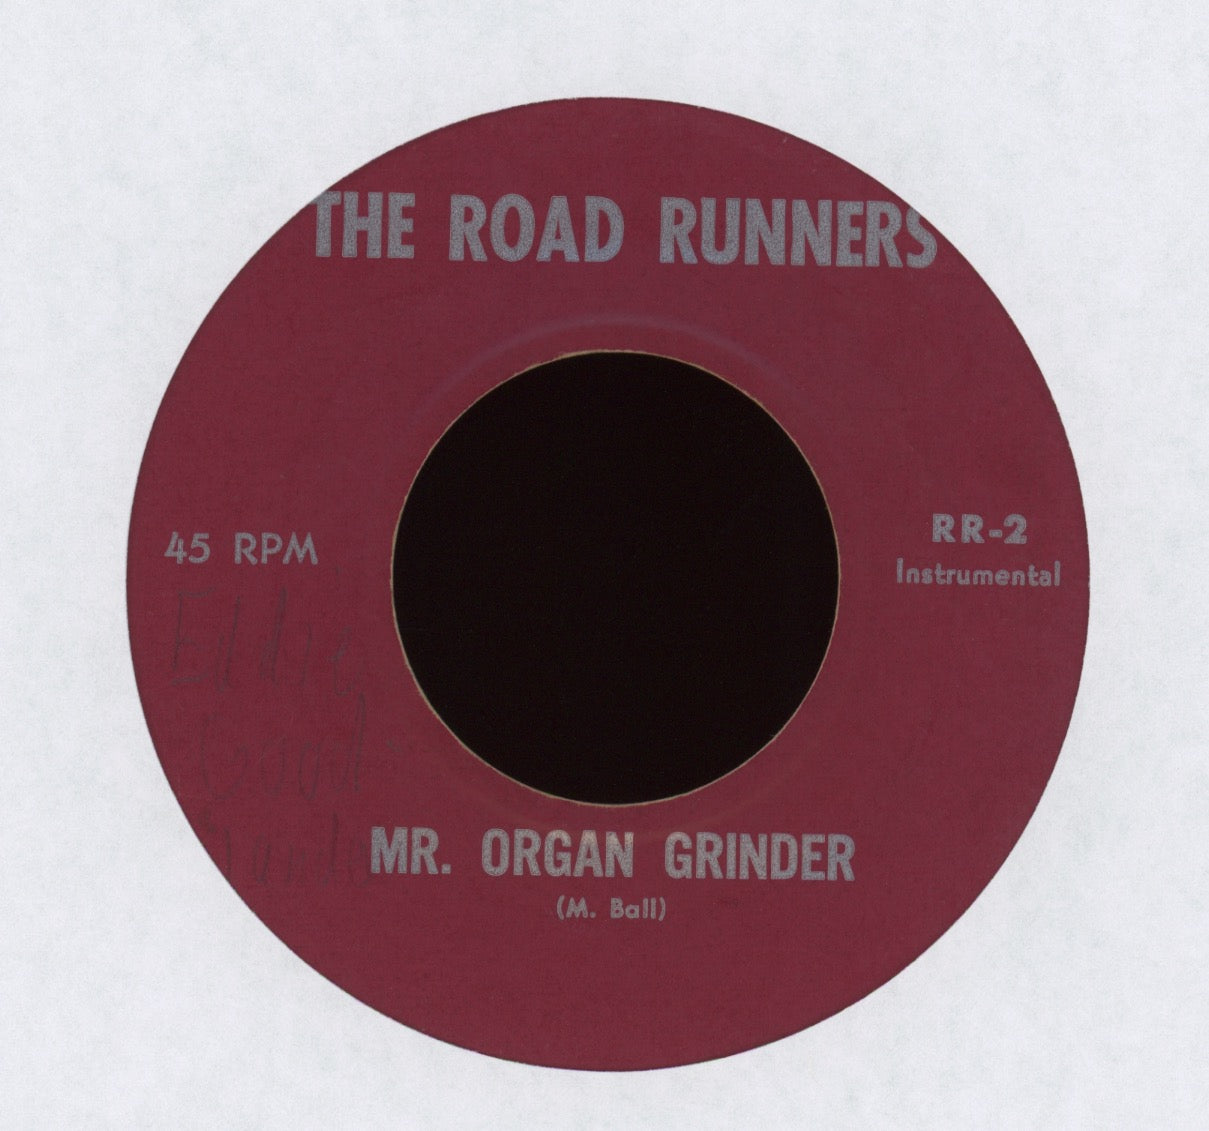 The Road Runners - Mr. Organ Grinder Private Press